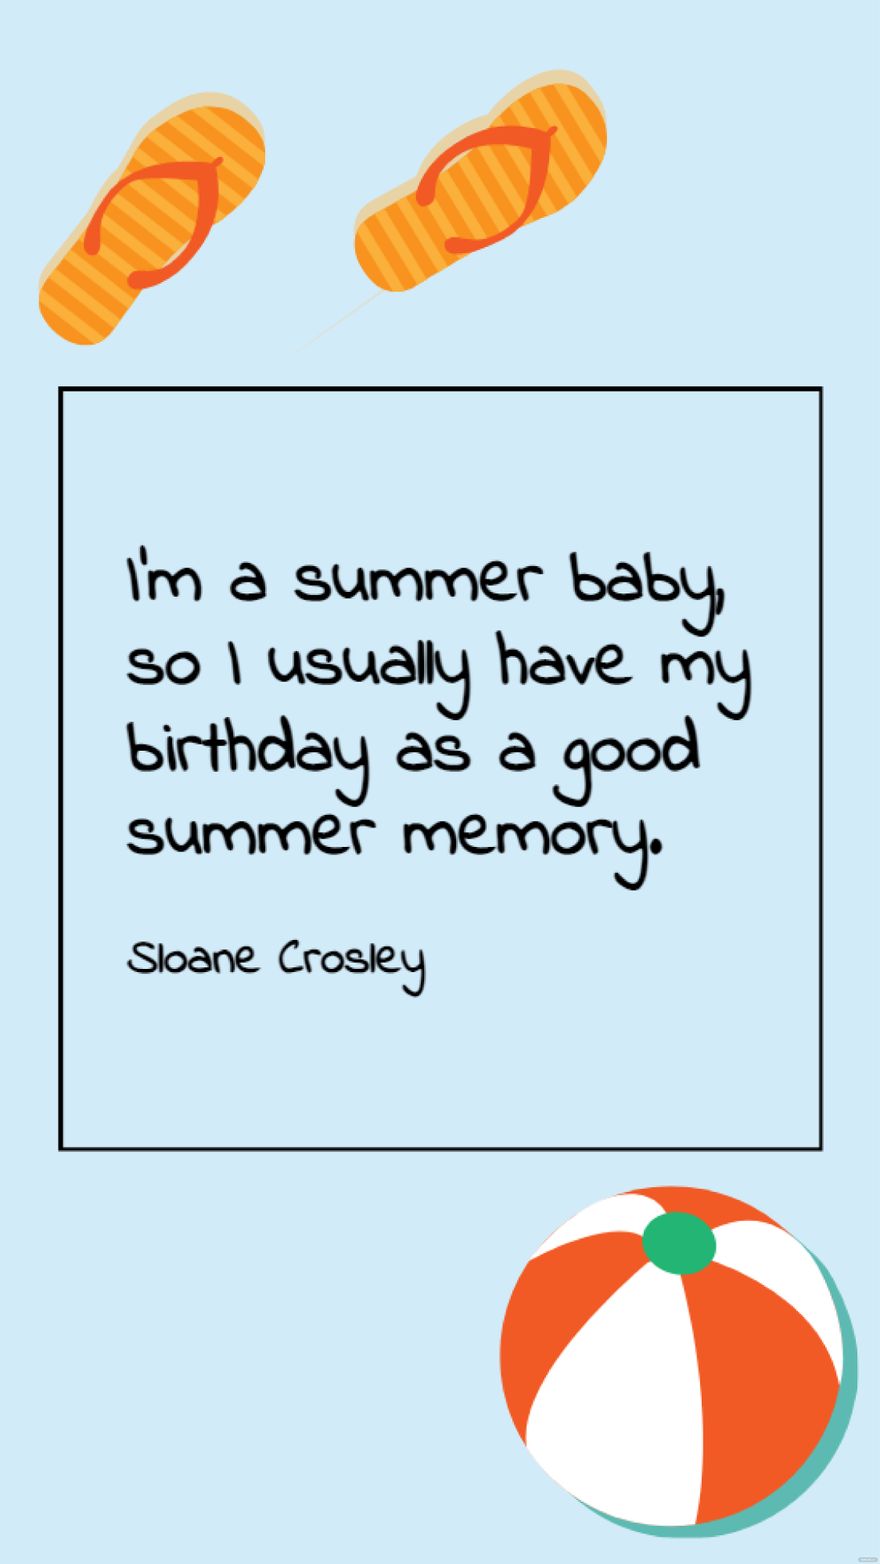 Free Sloane Crosley - I'm a summer baby, so I usually have my birthday as a good summer memory. in JPG